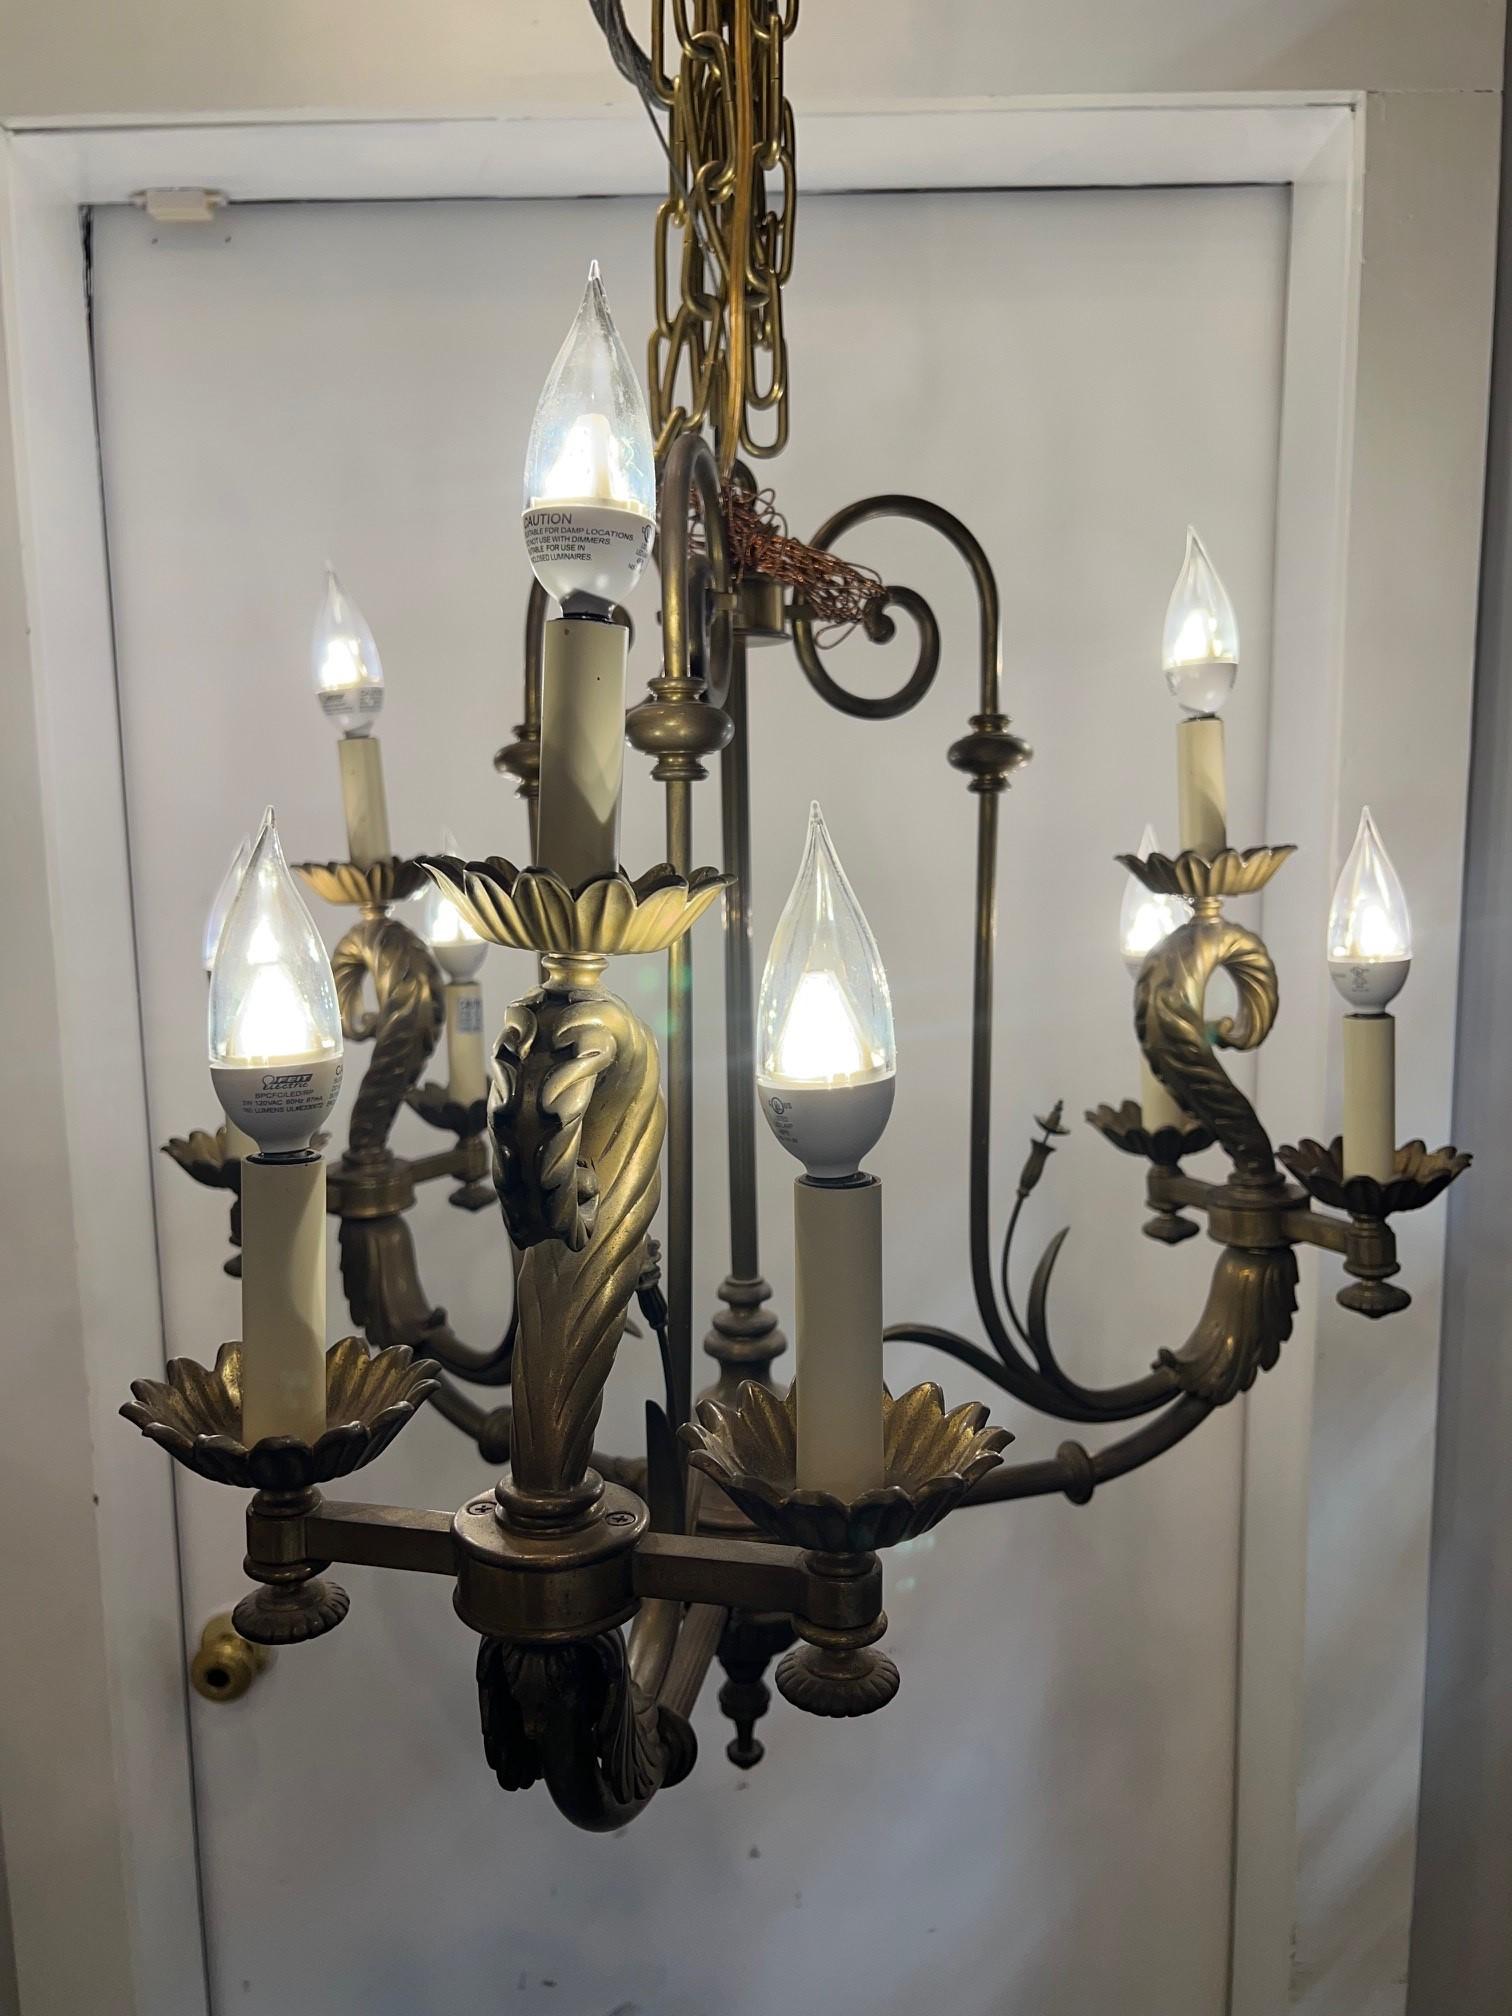 A very nice brass chandelier with three arms and nine lights in a antique brass finish. This is a Alexander-John chandelier a division of John Richard, a luxury home furnishings manufacturer. I believe it was manufactured in Vietnam in the late